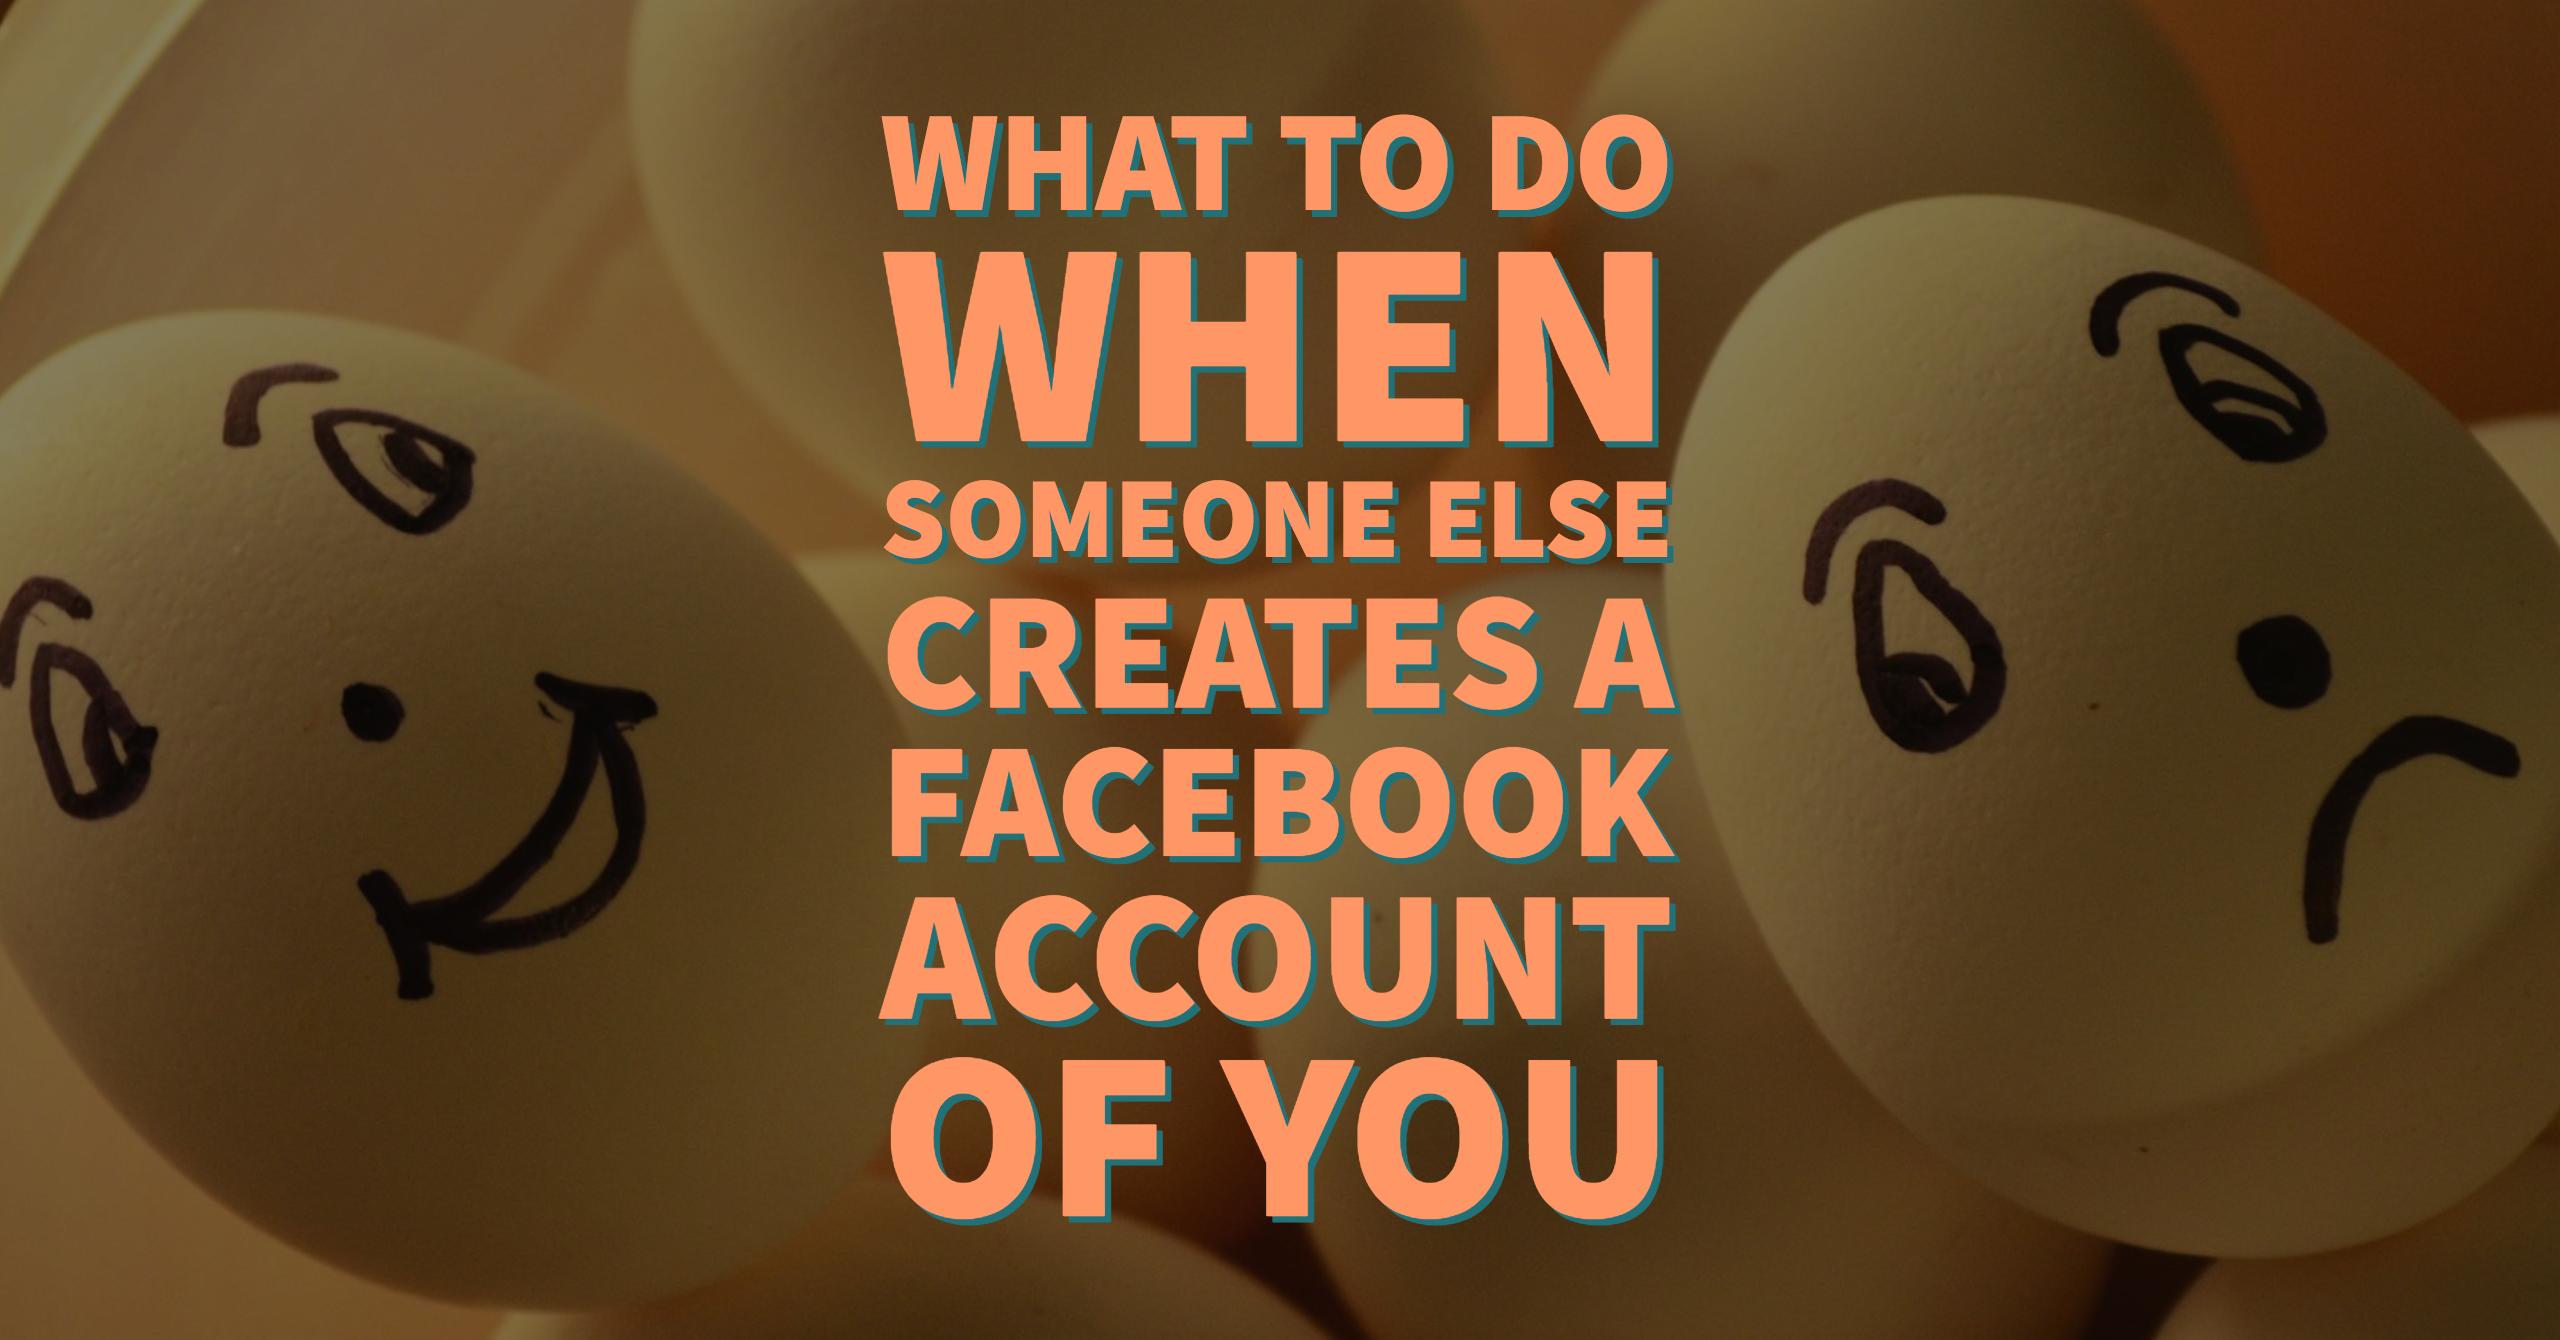 What To Do When Someone Else Creates a Facebook Account of YOU